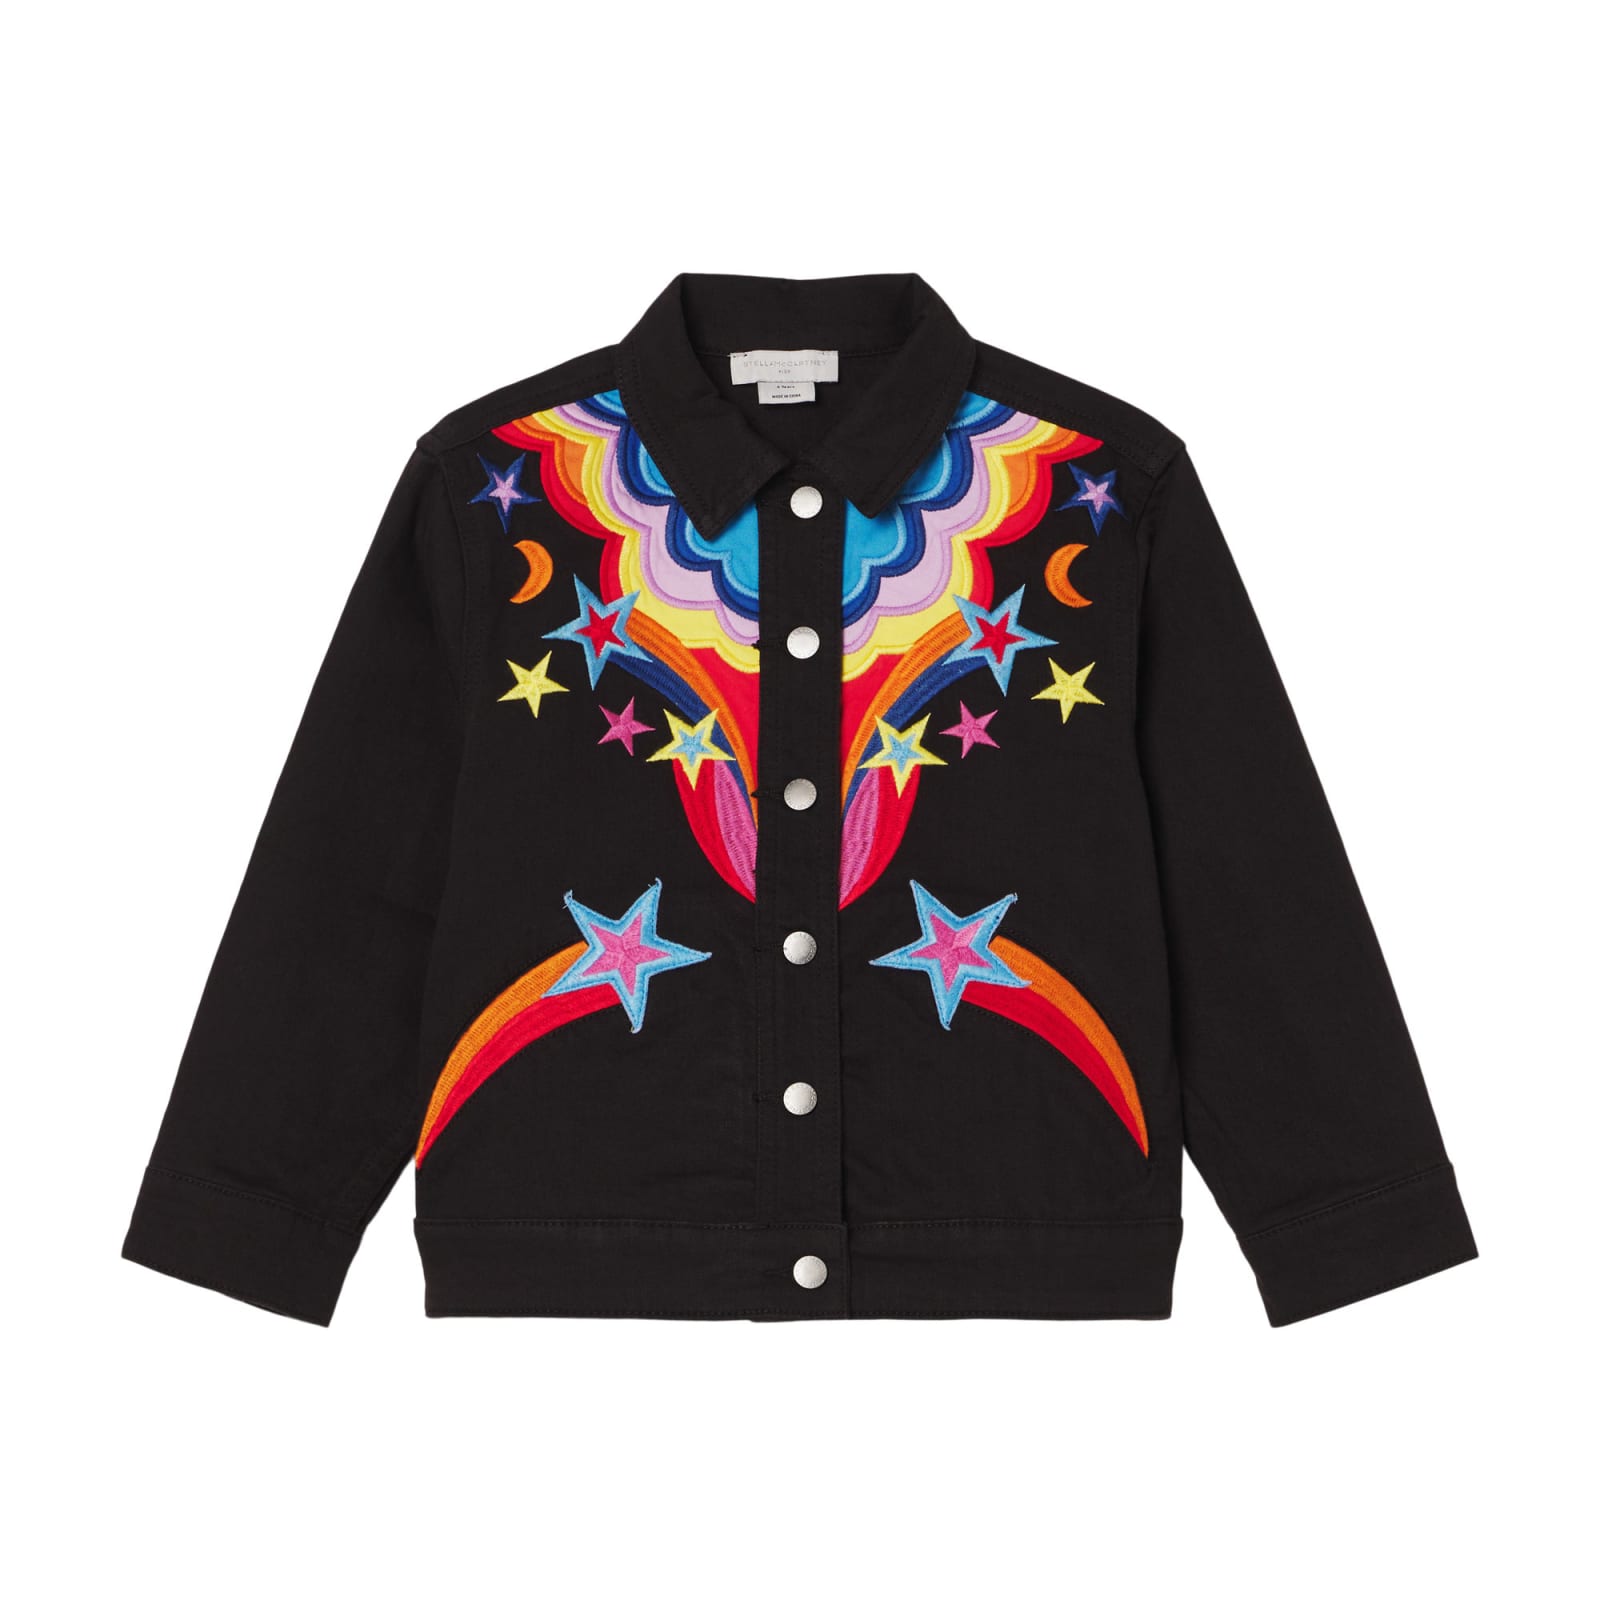 STELLA MCCARTNEY KIDS JACKET IN BLACK DENIM WITH EMBROIDERY FRONT AND BACK